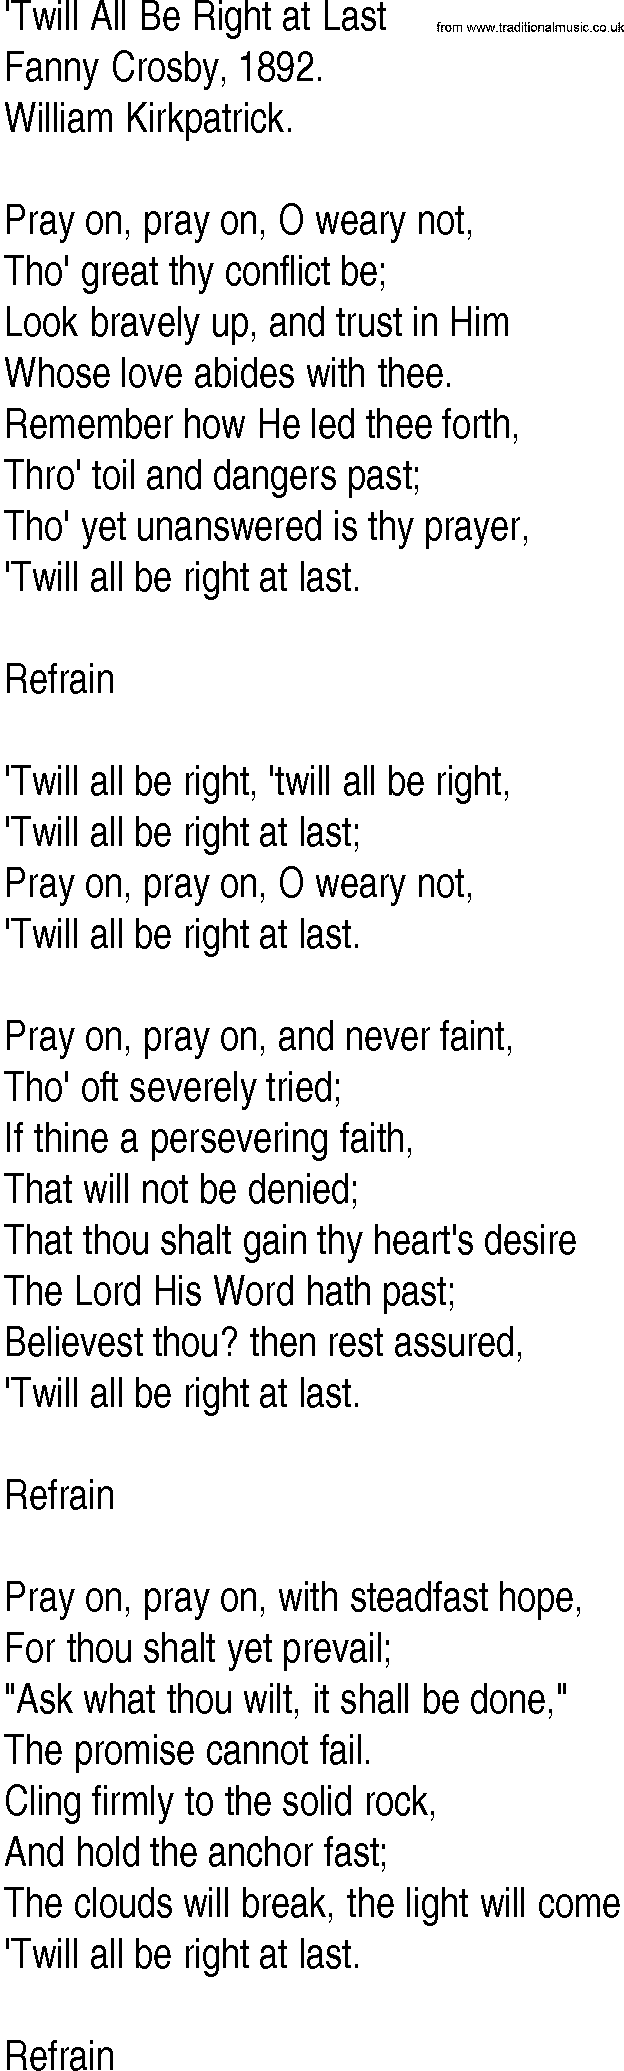 Hymn and Gospel Song: 'Twill All Be Right at Last by Fanny Crosby lyrics